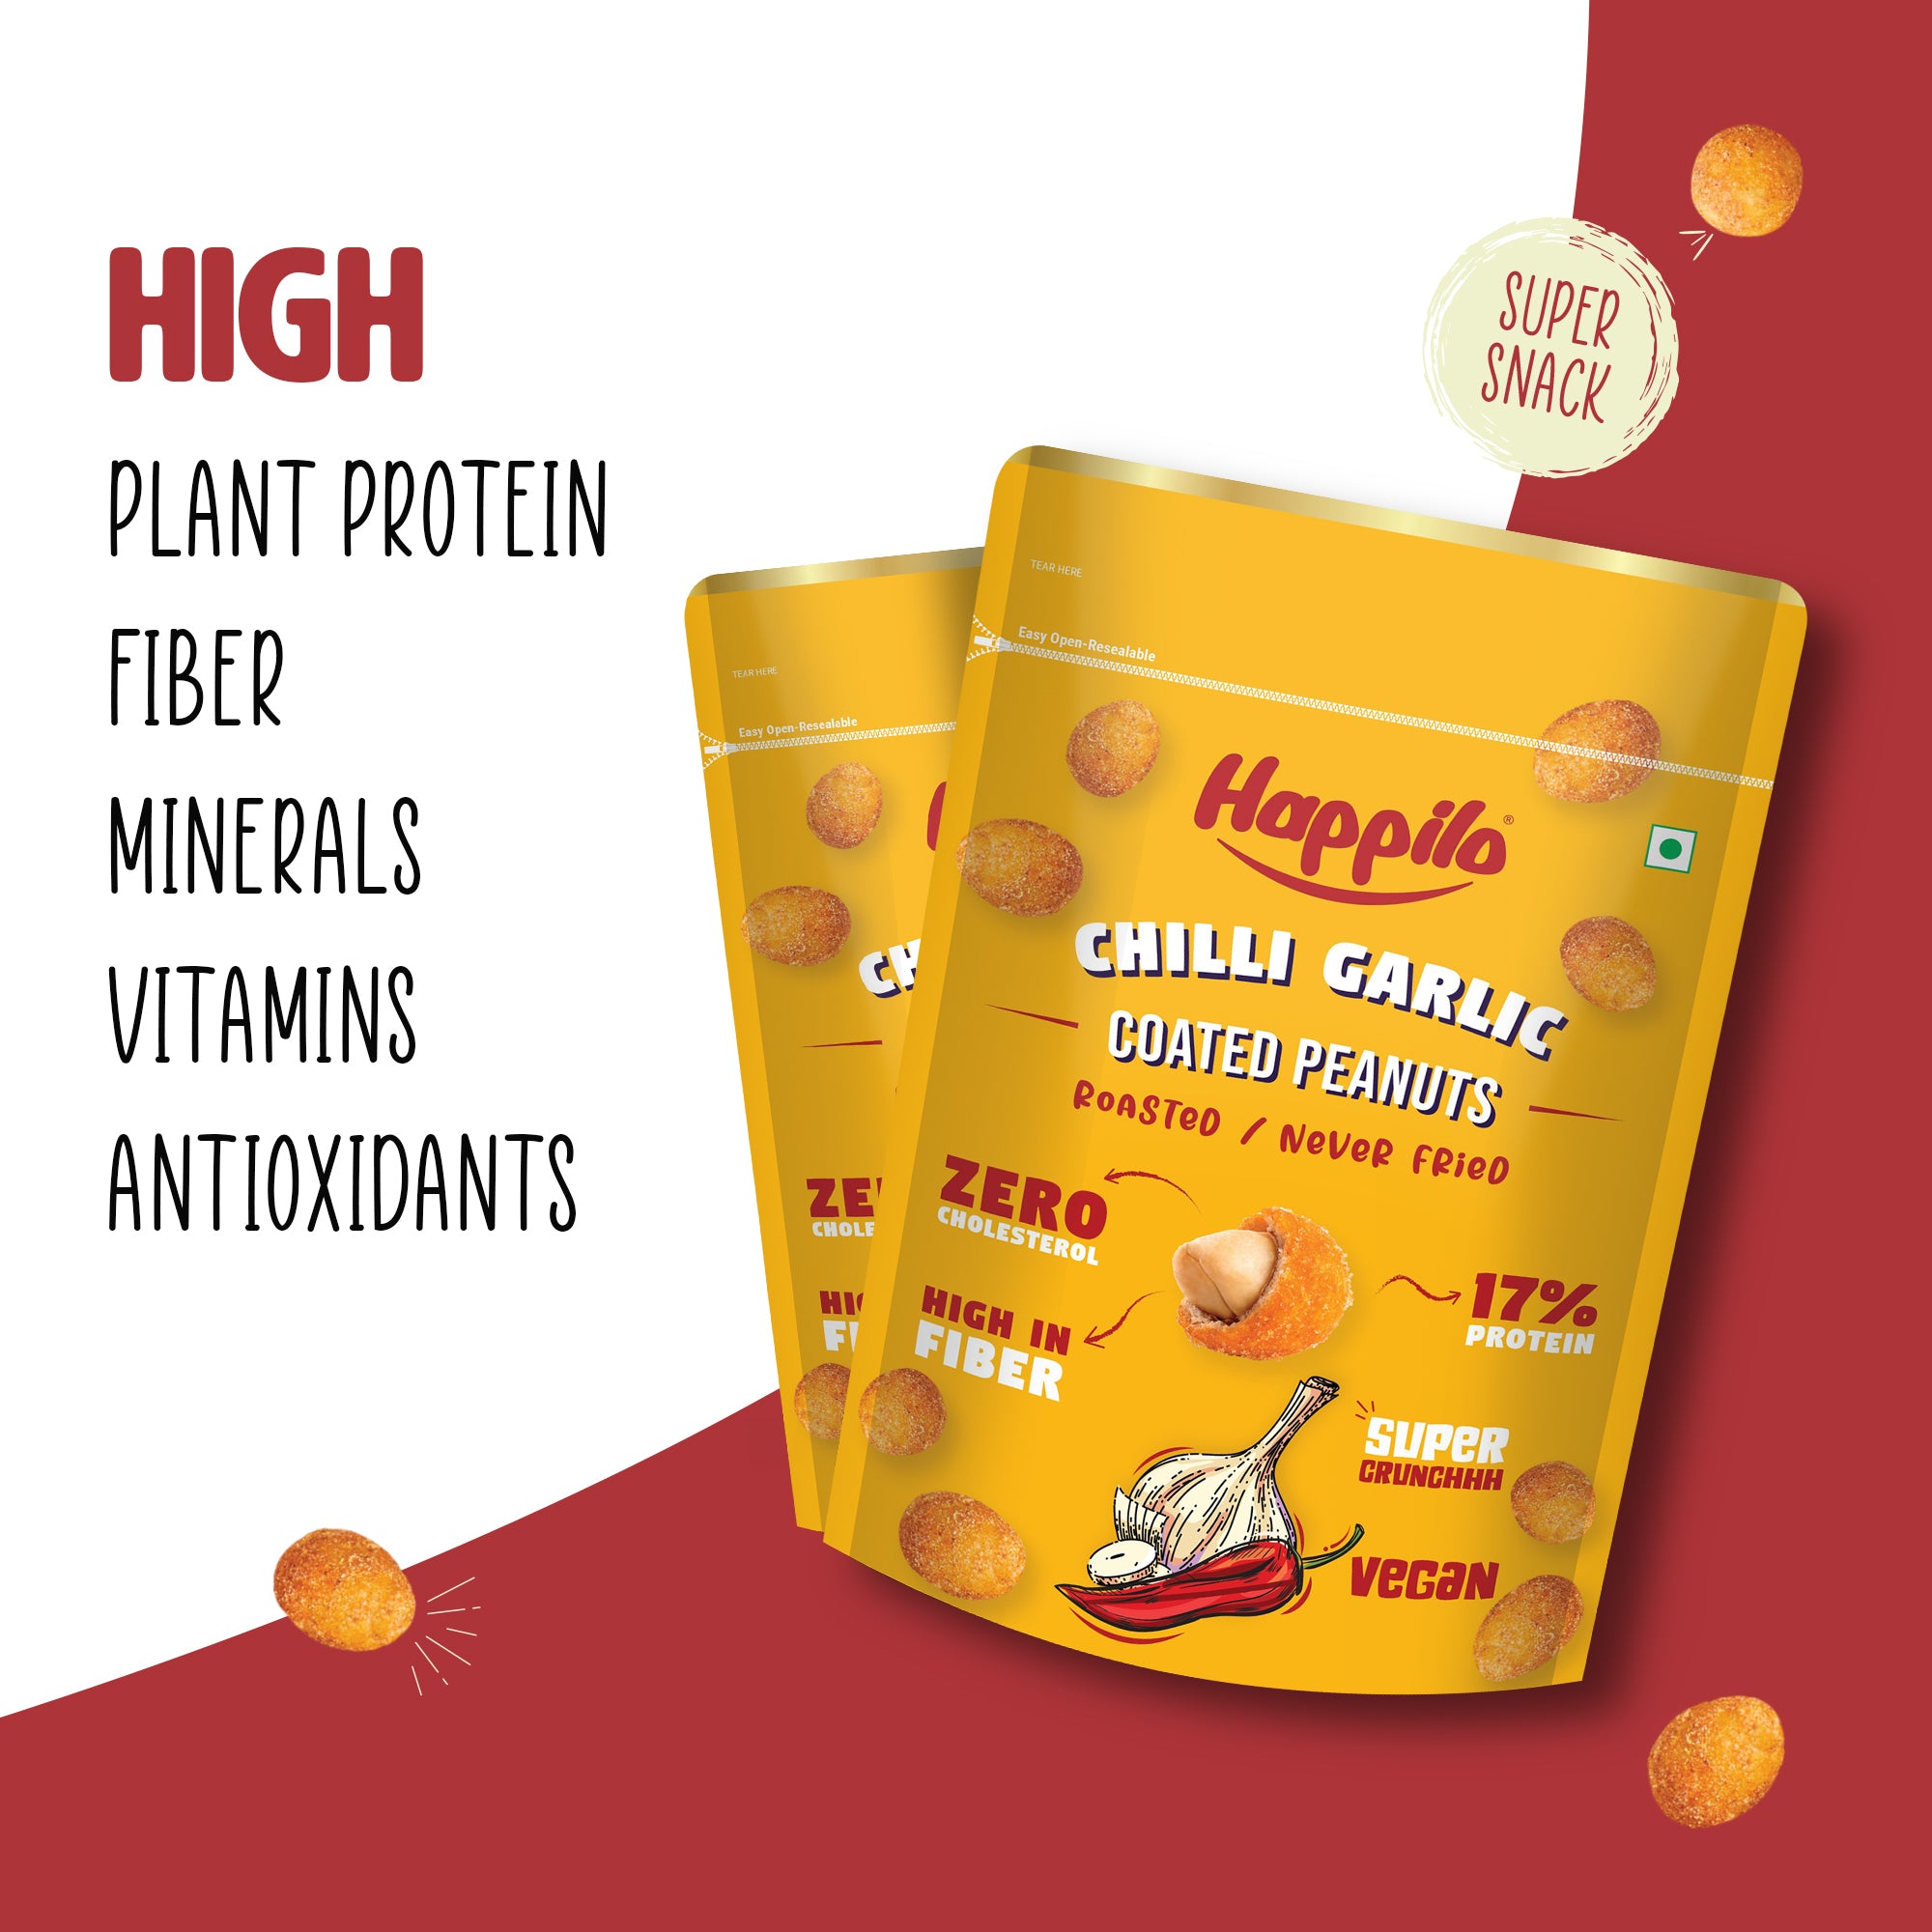 Happilo Premium Super Snack Chili Garlic Peanut 150g, Crunchy and Nutty, High in Protein and Dietary Fibre